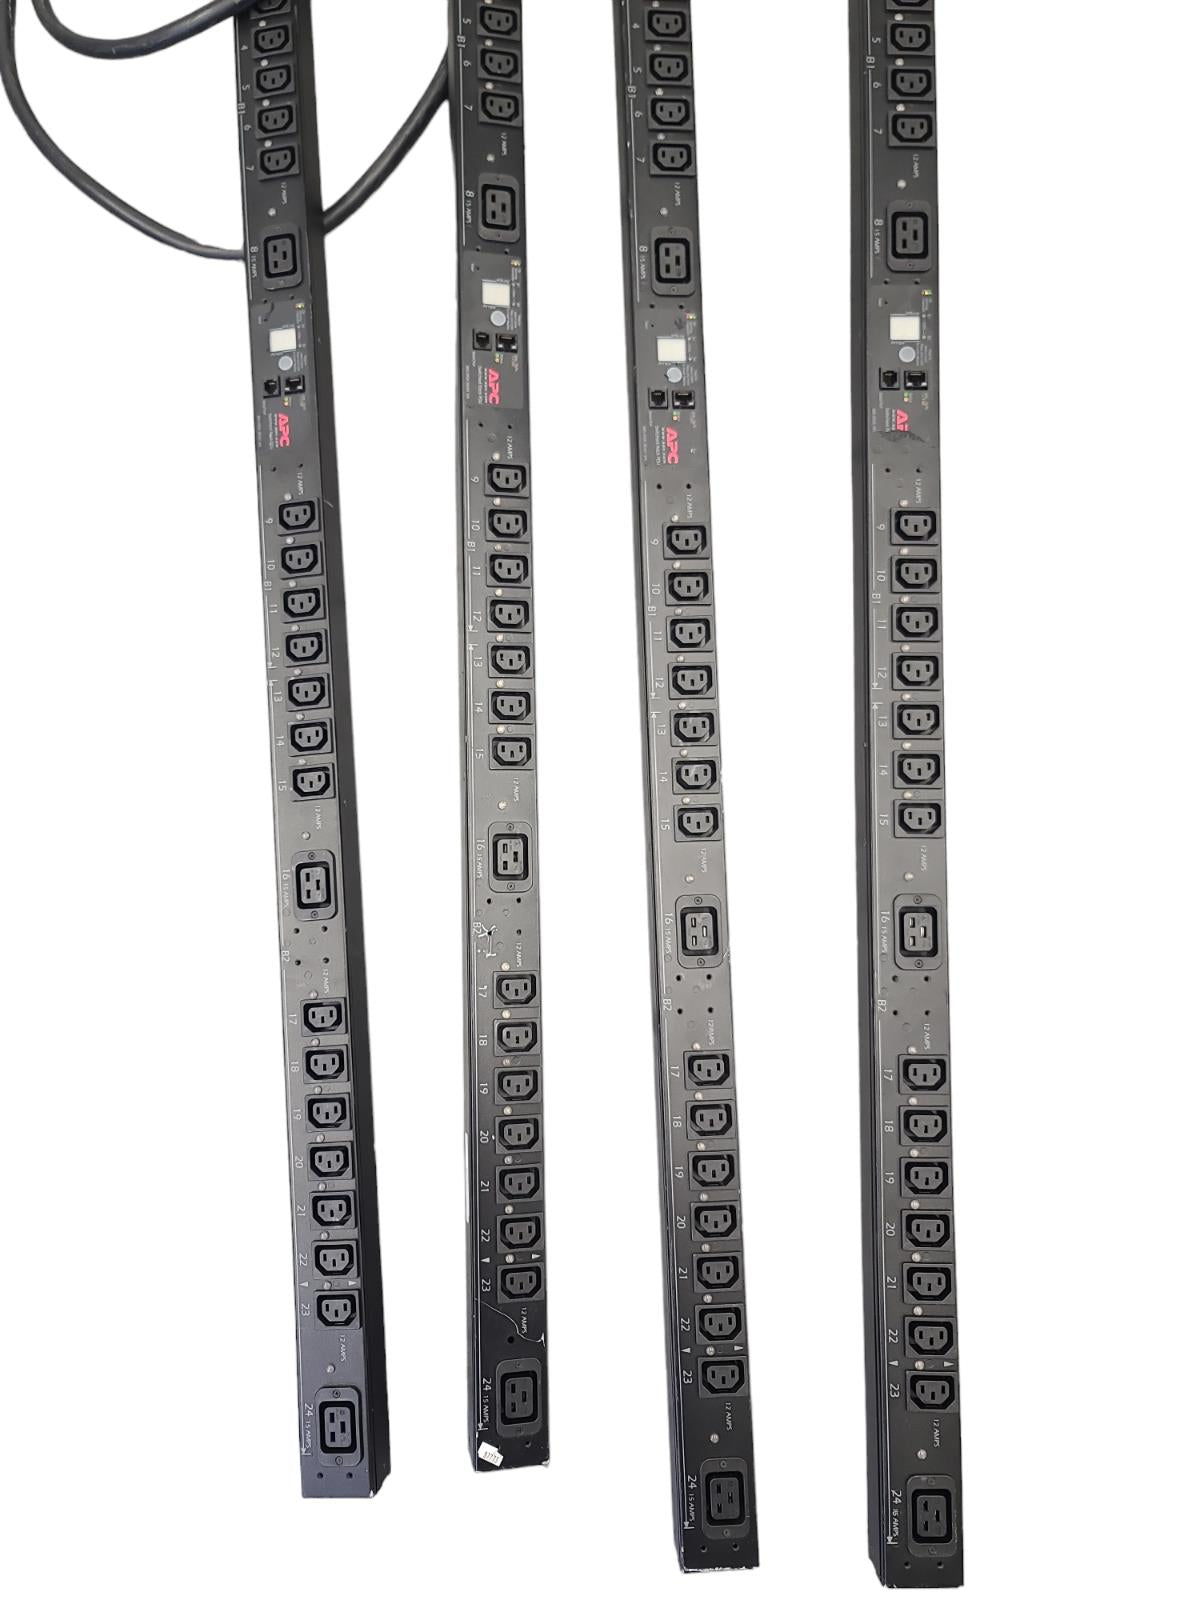 Lot of 4. APC AP7941 SWITCHED RACK PDU 24 OUTLET 200-240 VAC 24A